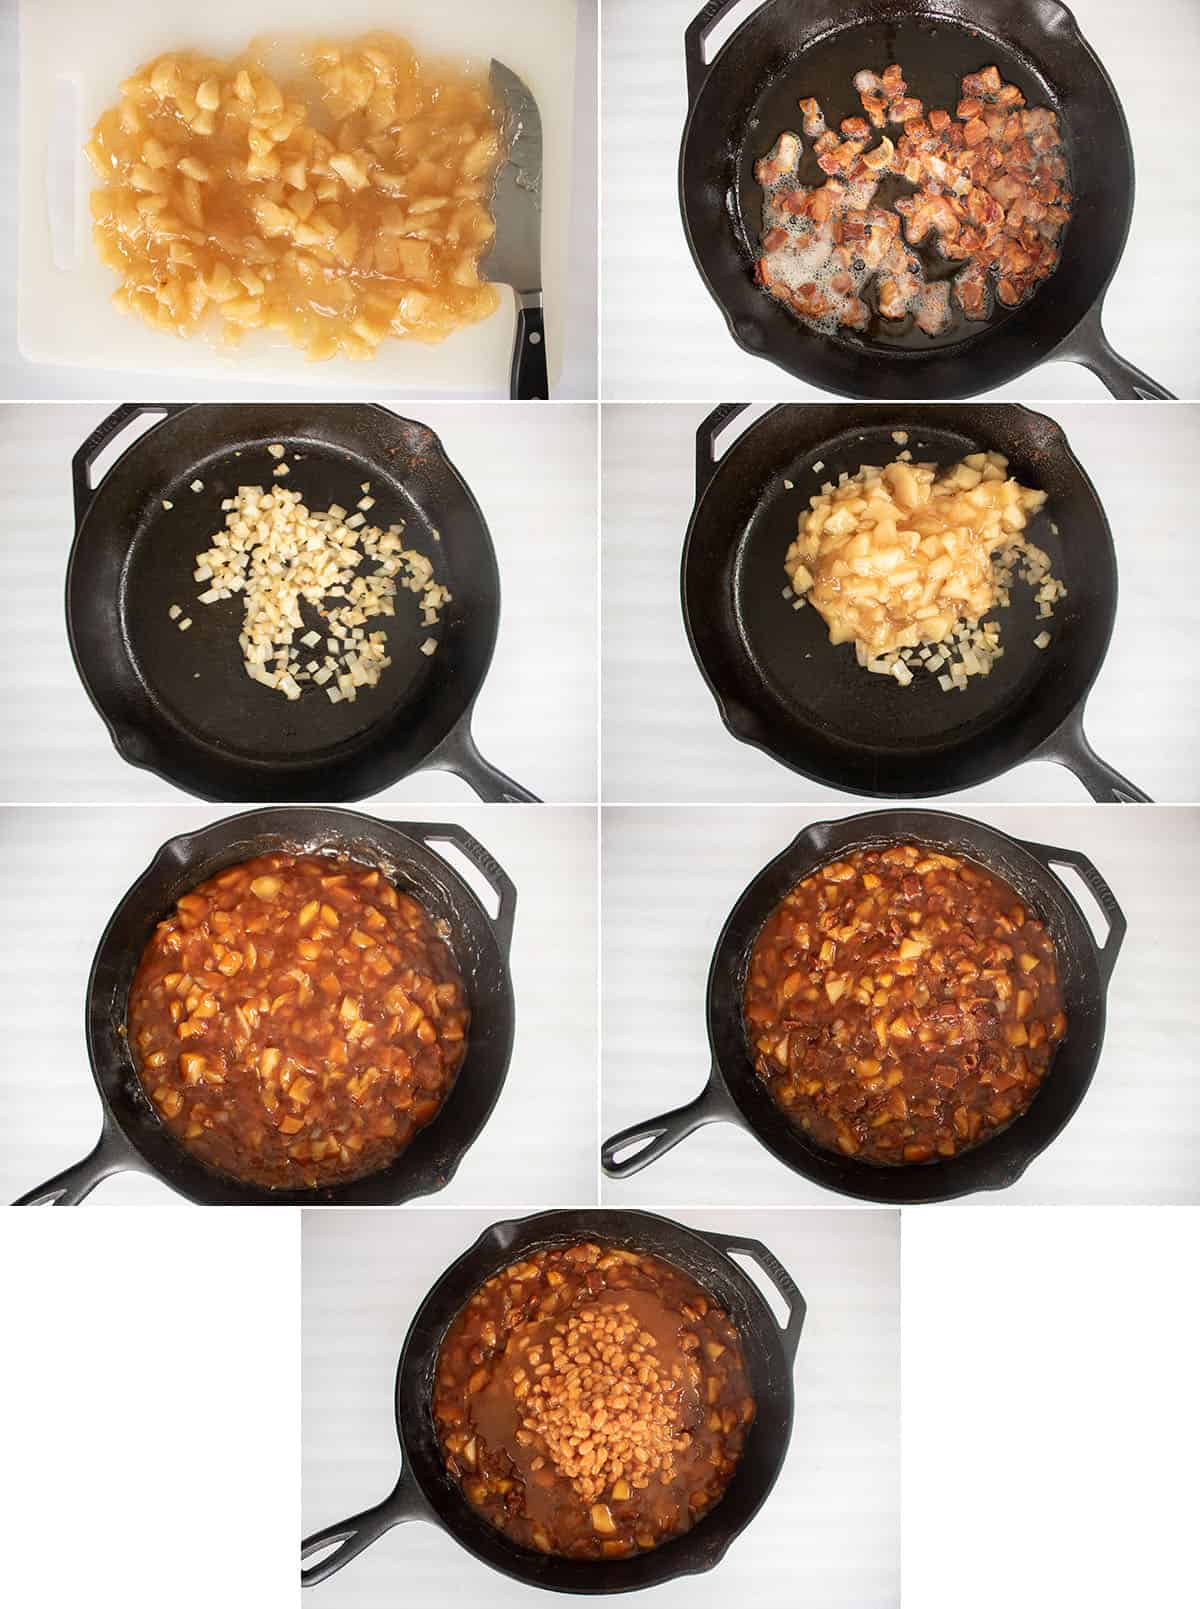 Showing a collage of How to make Apple Pie Baked Beans.